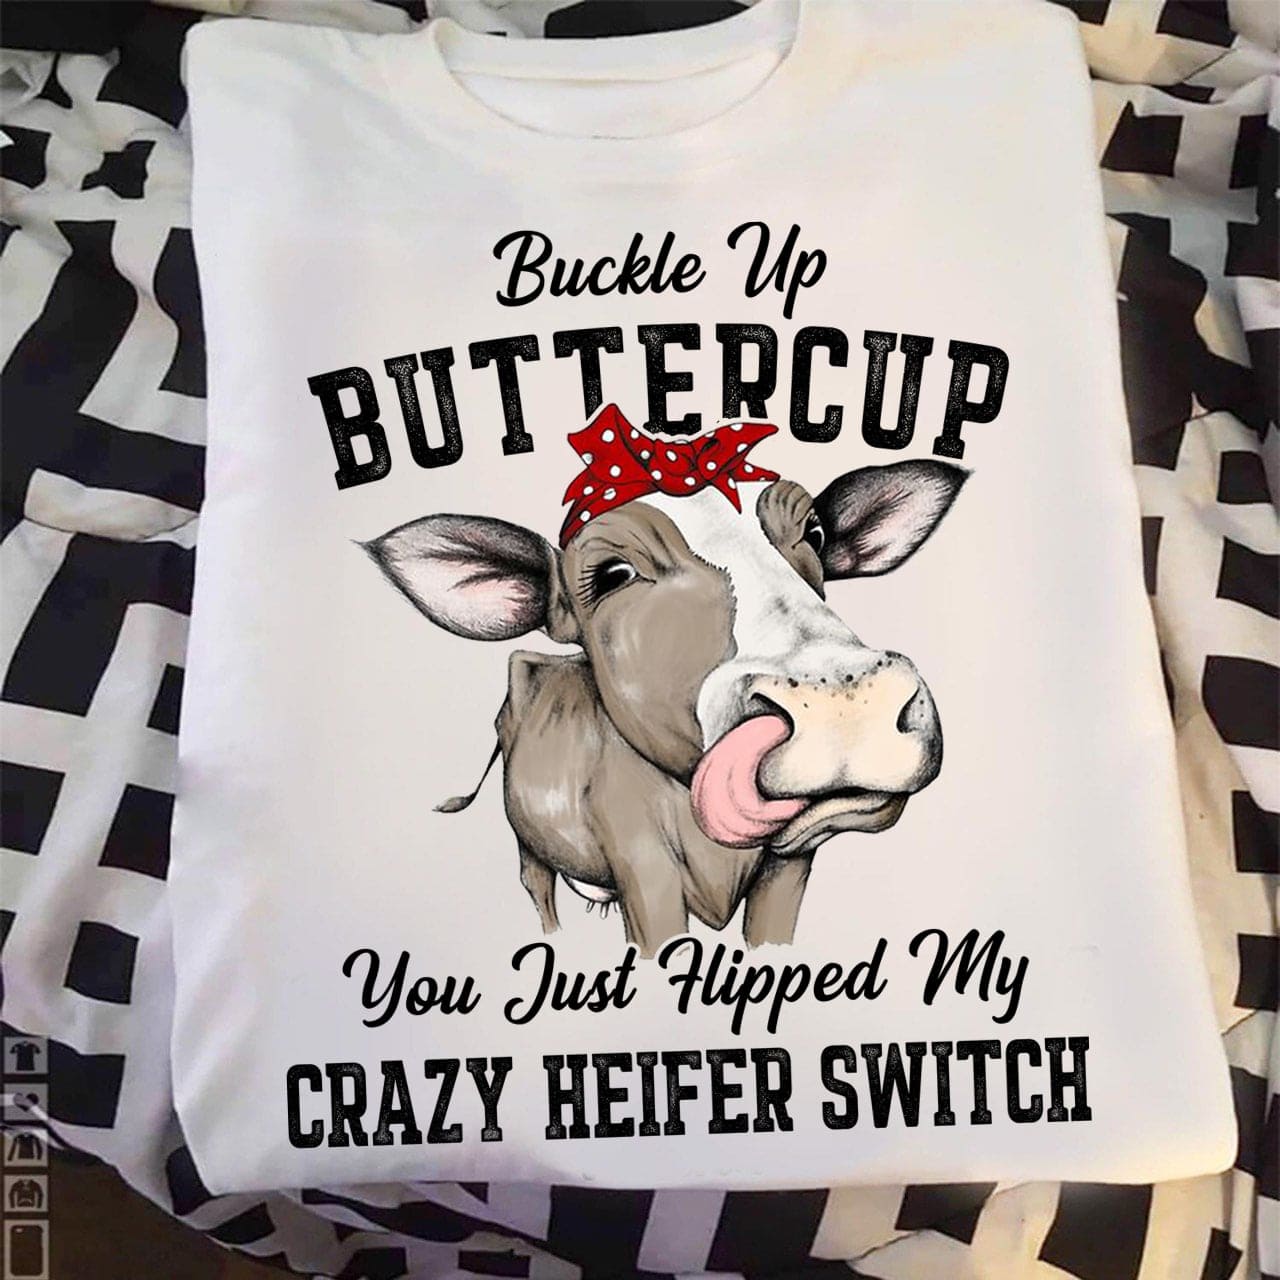 Buckle up buttercup you just flipped my crazy heifer switch - Funny cow graphic T-shirt